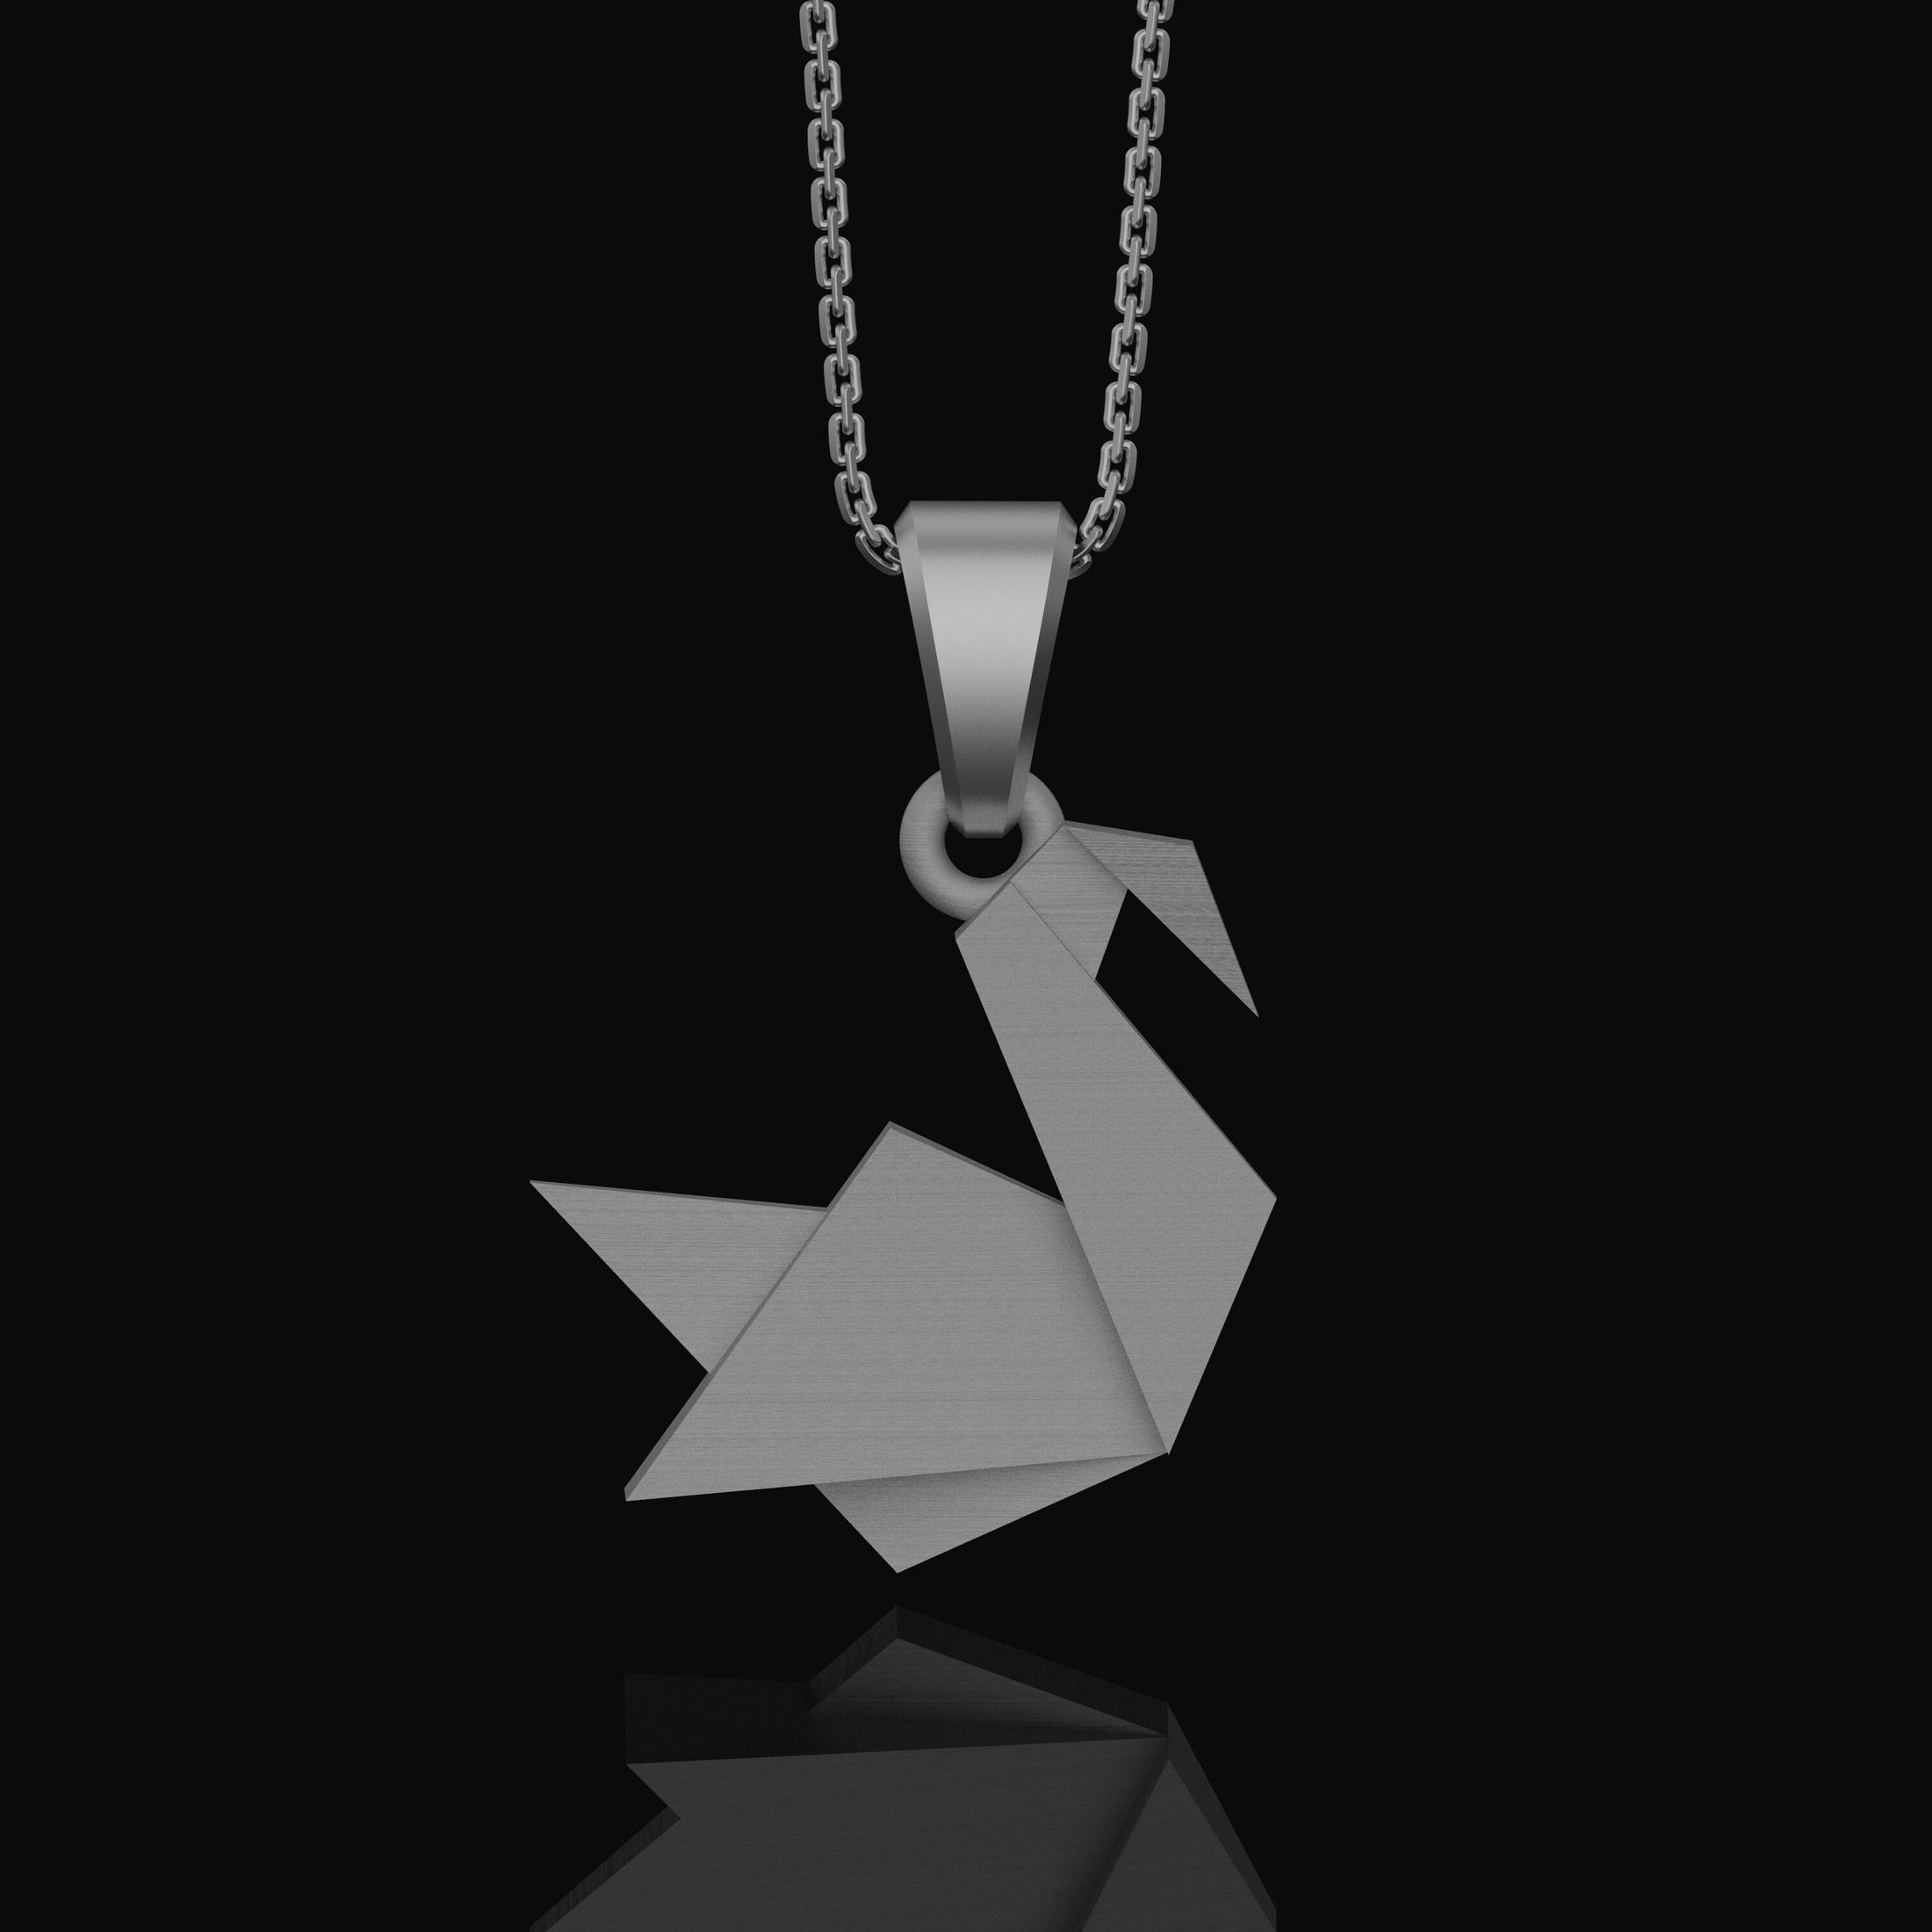 Silver Origami Swan Charm Necklace - Elegant Folded Swan Pendant, Chic and Artistic, Graceful Nature-Inspired Jewelry Polished Matte